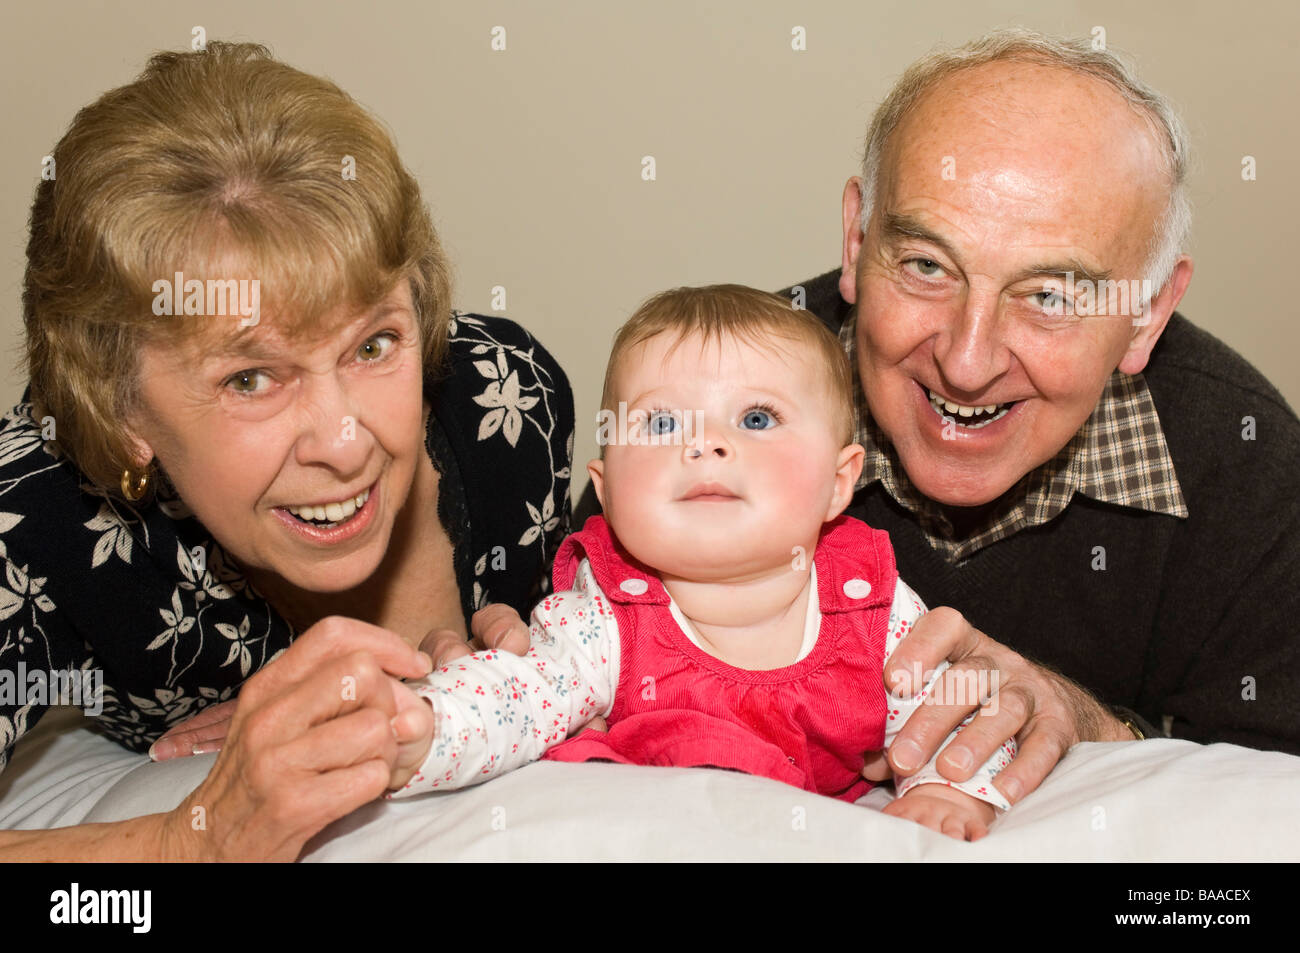 Horizontal close up portrait of proud grandparents with their cute baby granddaughter Stock Photo